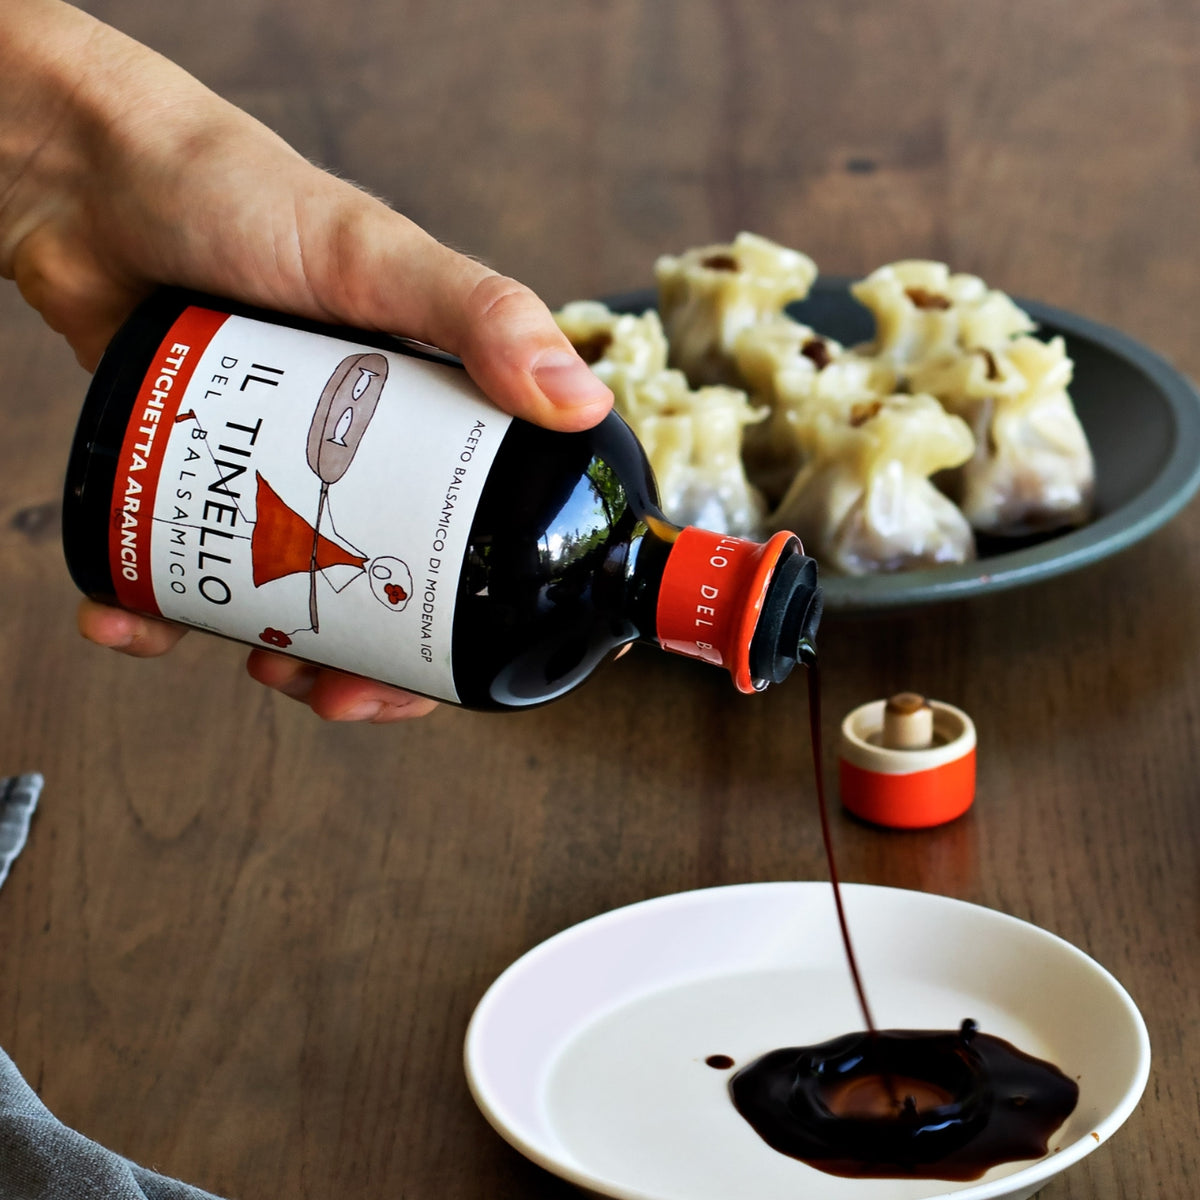 l Borgo del Balsamico Il Tinello Balsamic Vinegar of Modena IGP Orange Label Medium Acidity (without box) 250ml | Imported and distributed in the UK by Just Gourmet Foods